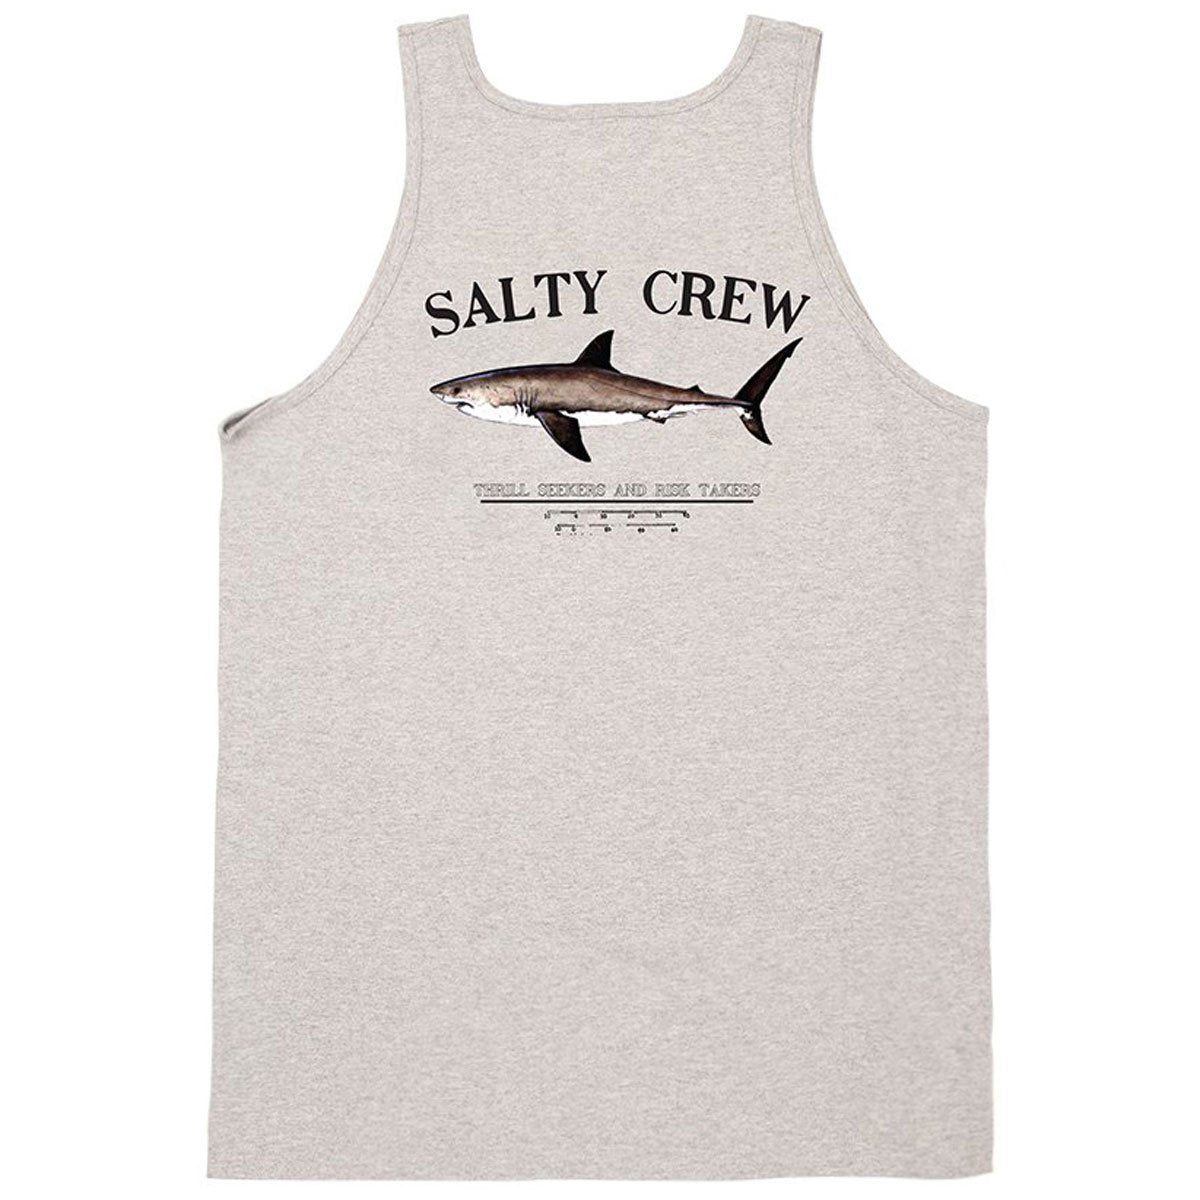 Salty Crew Bruce Tank Top - Athletic Heather image 2